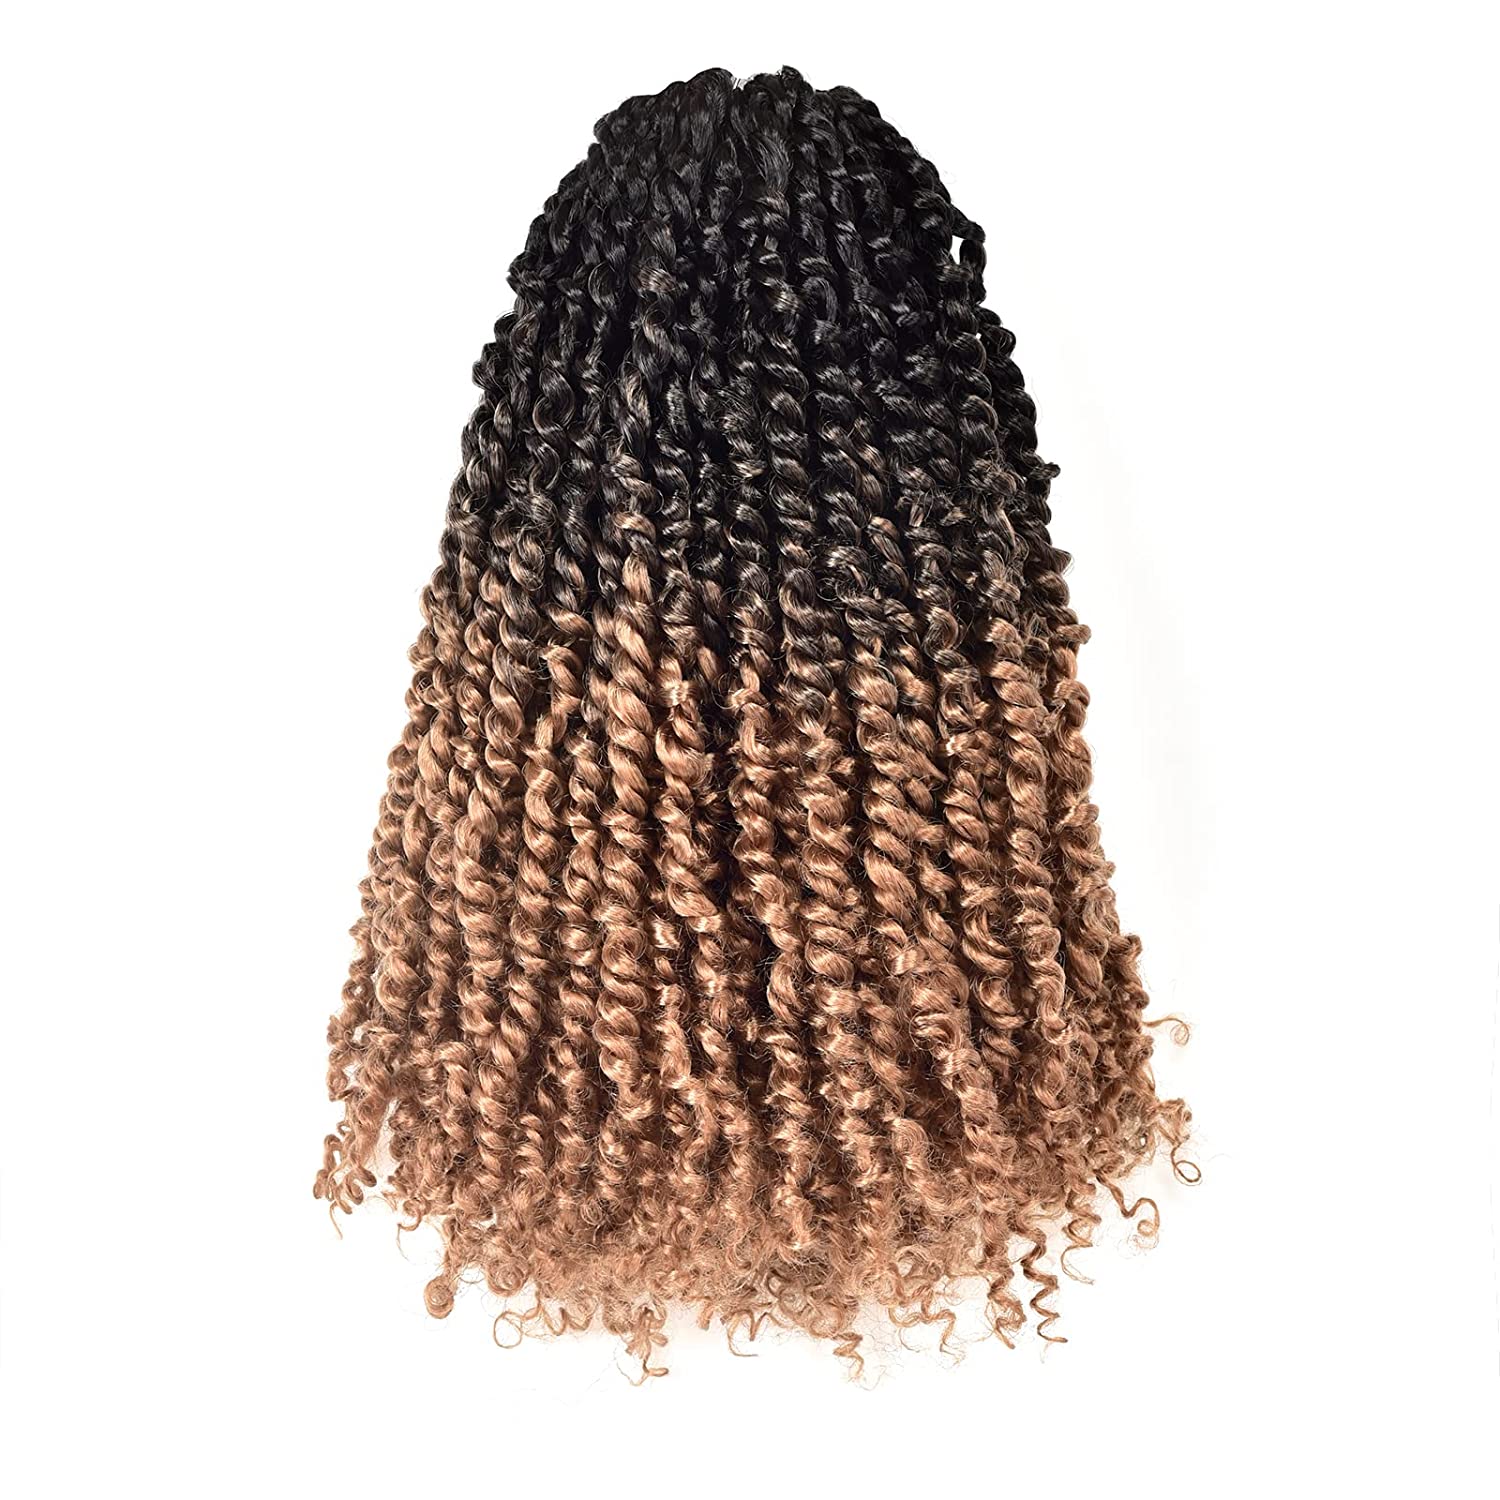 OUTLET DEAL | Tiana Passion Twist 6-8